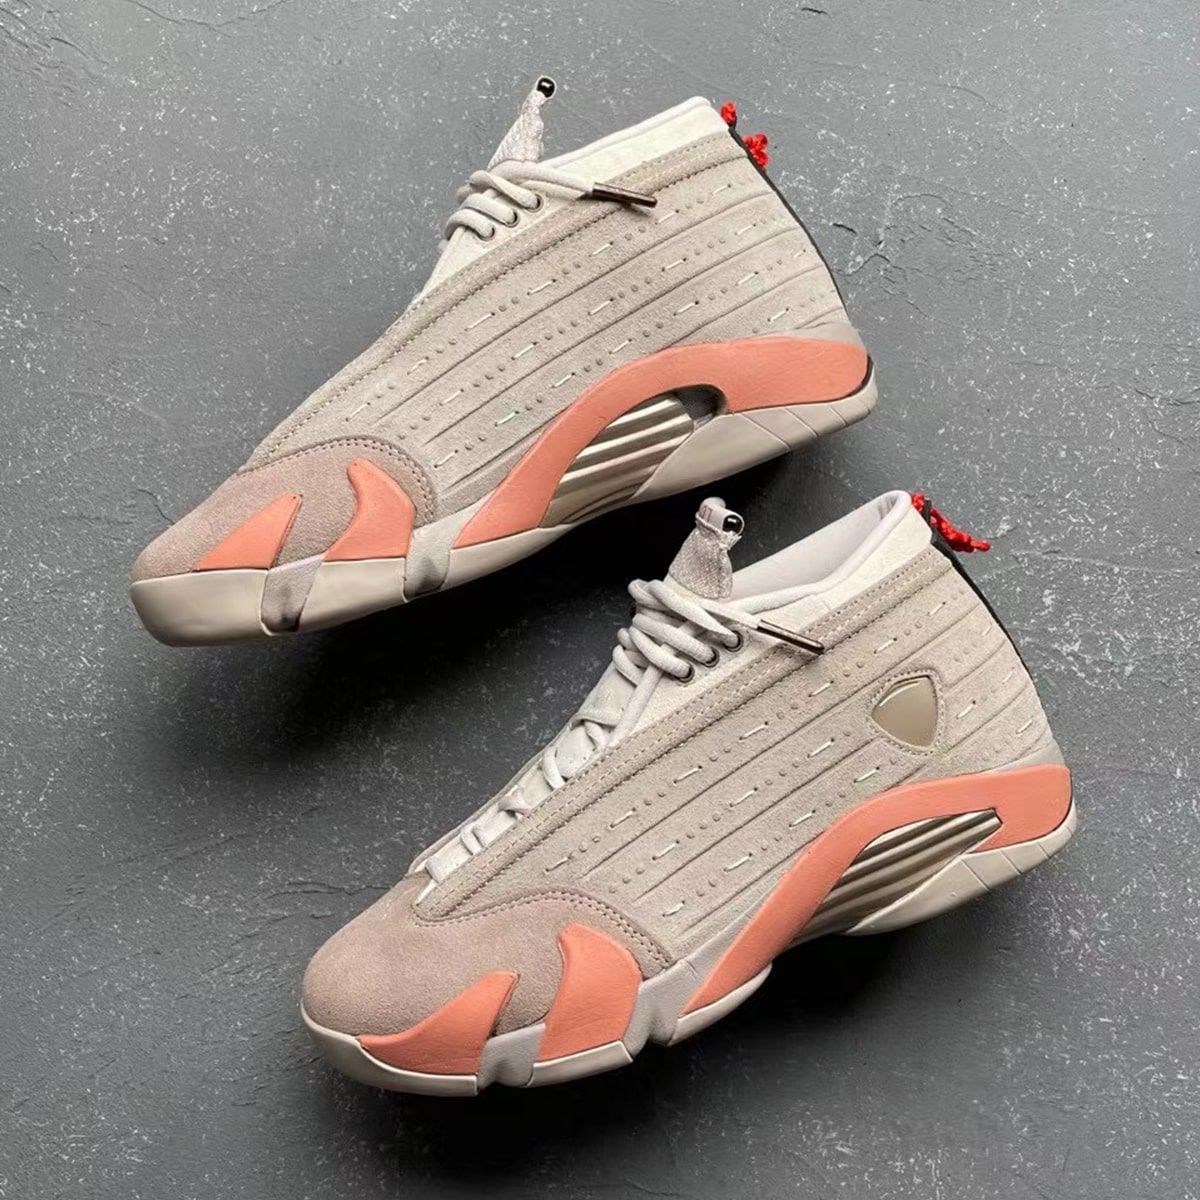 Where to Buy the CLOT x Air Jordan 14 Low | House of Heat°